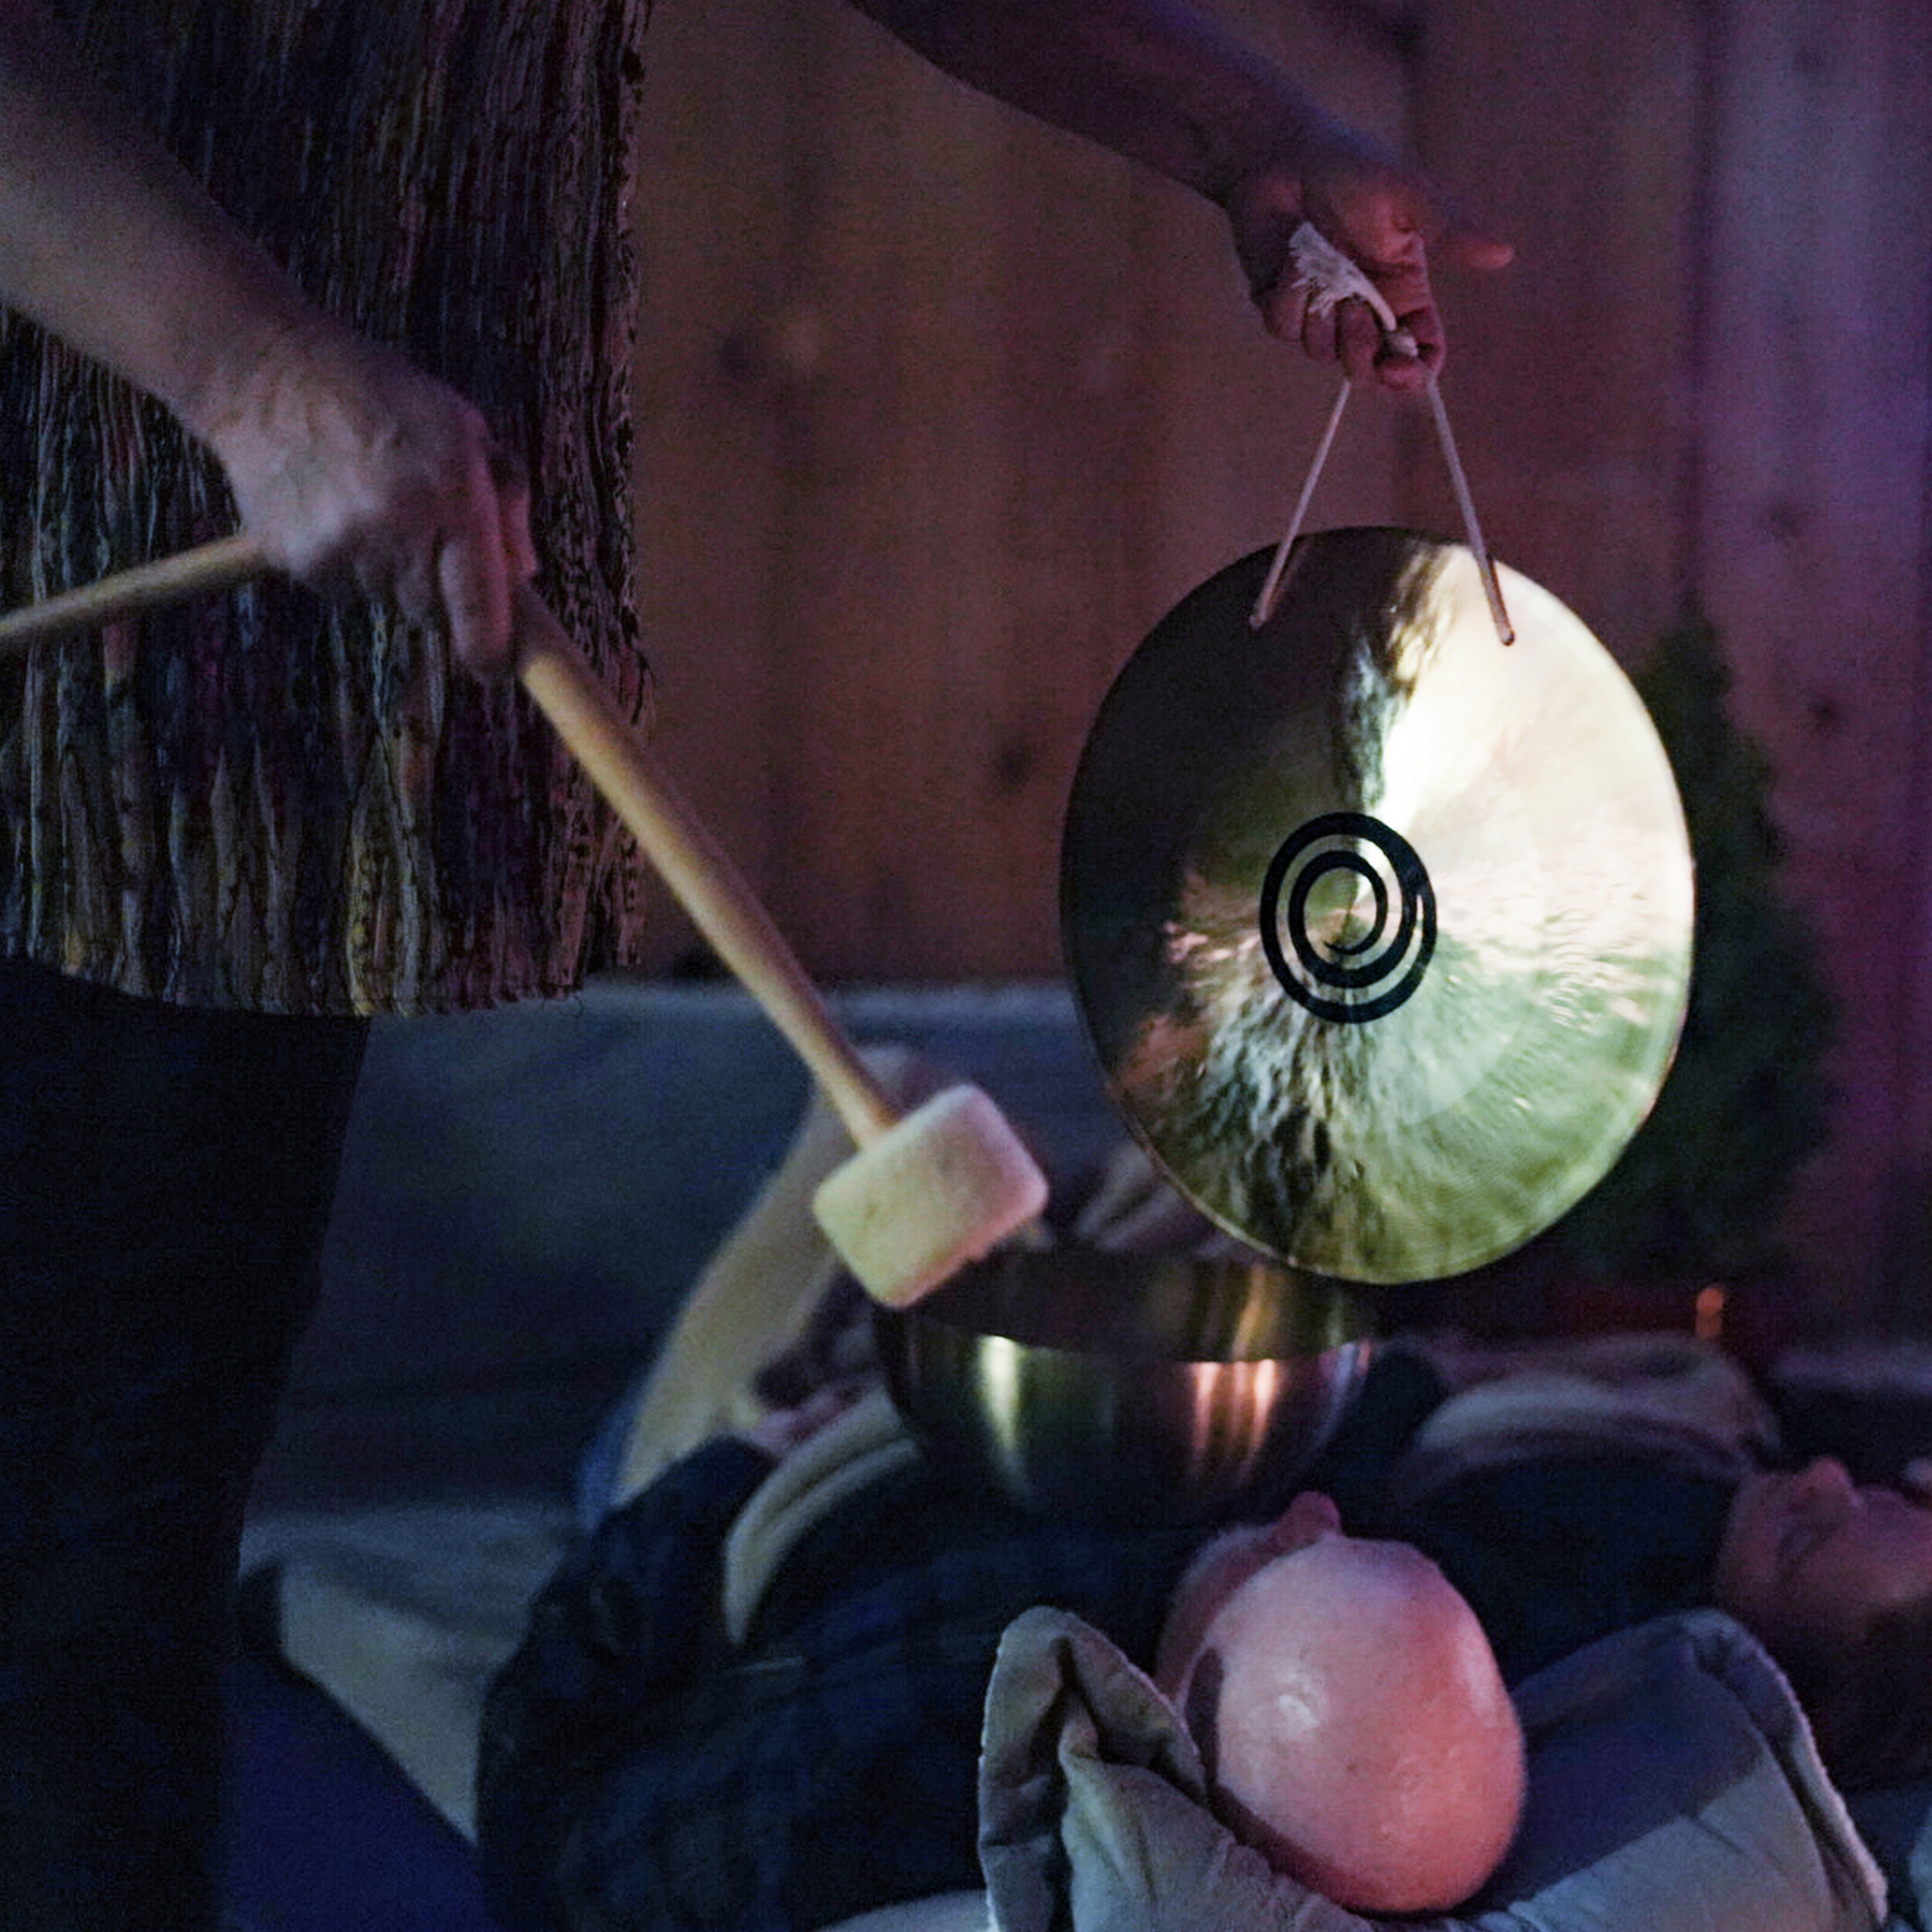  Nadean preforms sound therapy over a member during a ceremony. A hand gong is played above their head to allow negative energy to leave the mind. This helps members clear minds and refocus on their lives.   